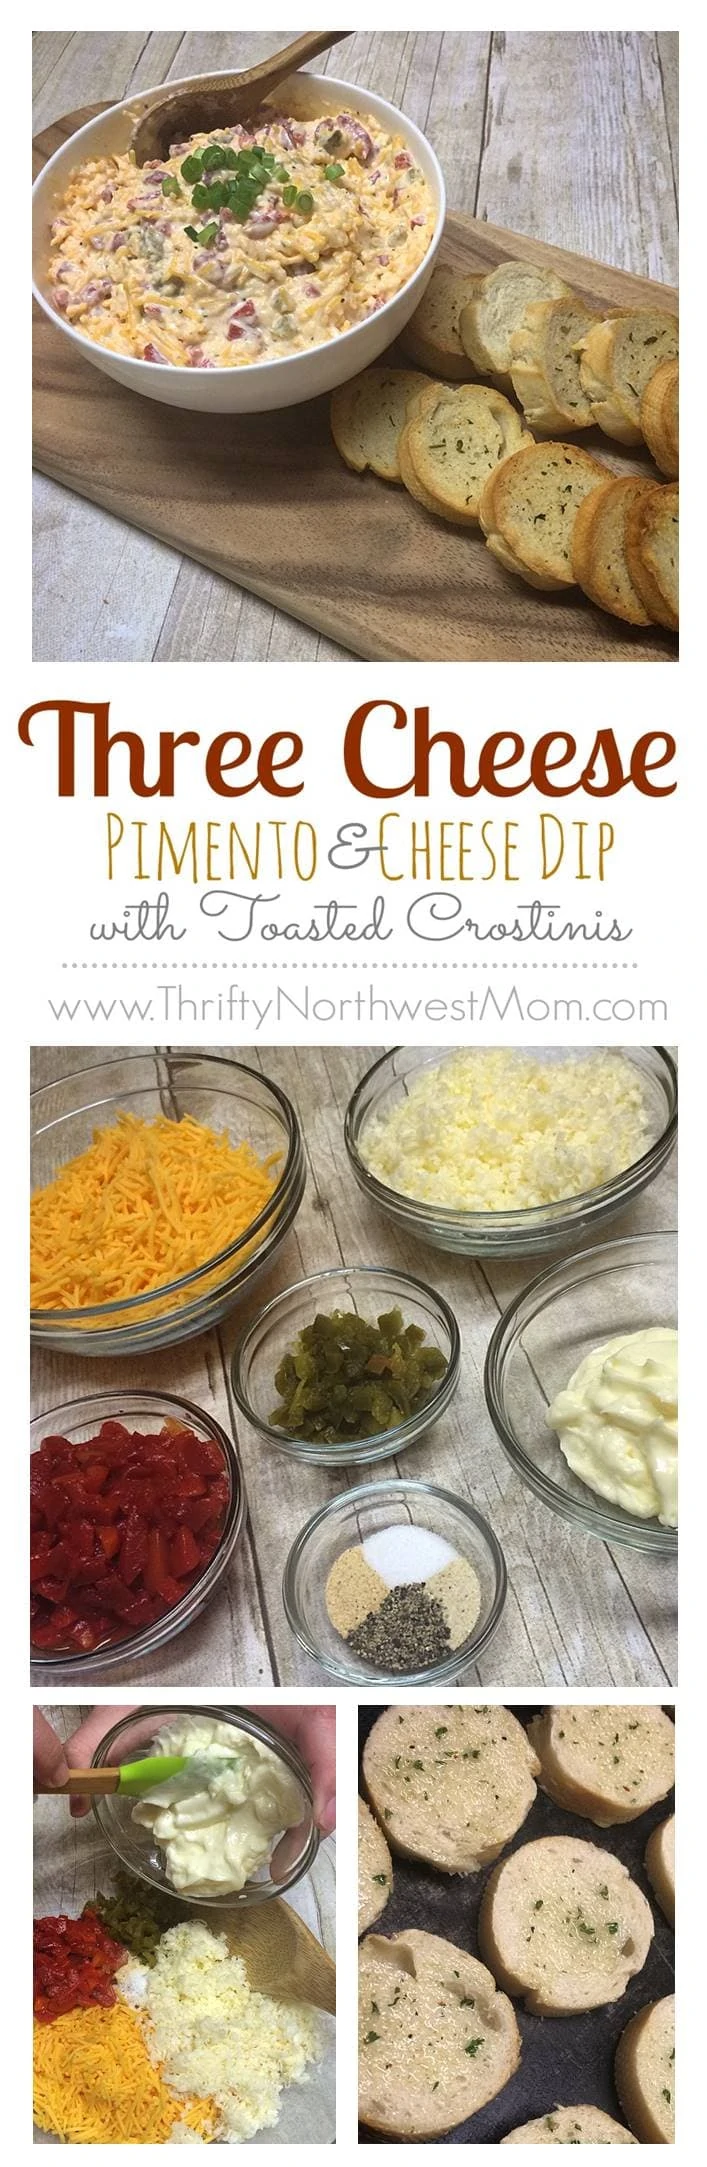 1.10 Three Cheese Pimento and Cheese Dip VERTICAL - FOUR